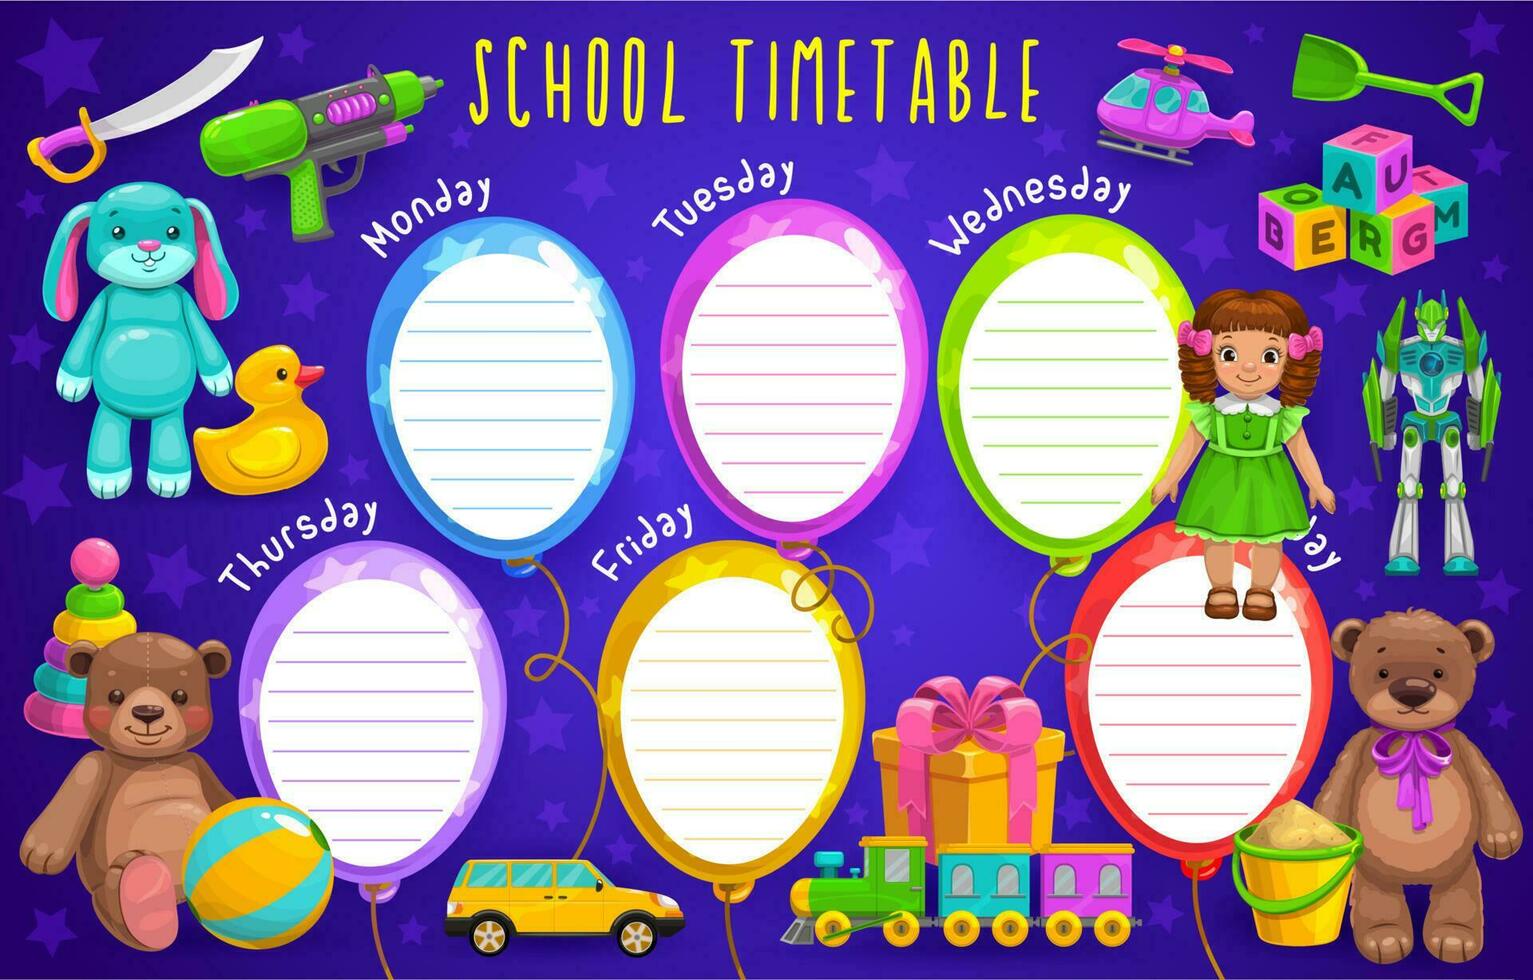 School timetable with balloons and toys vector